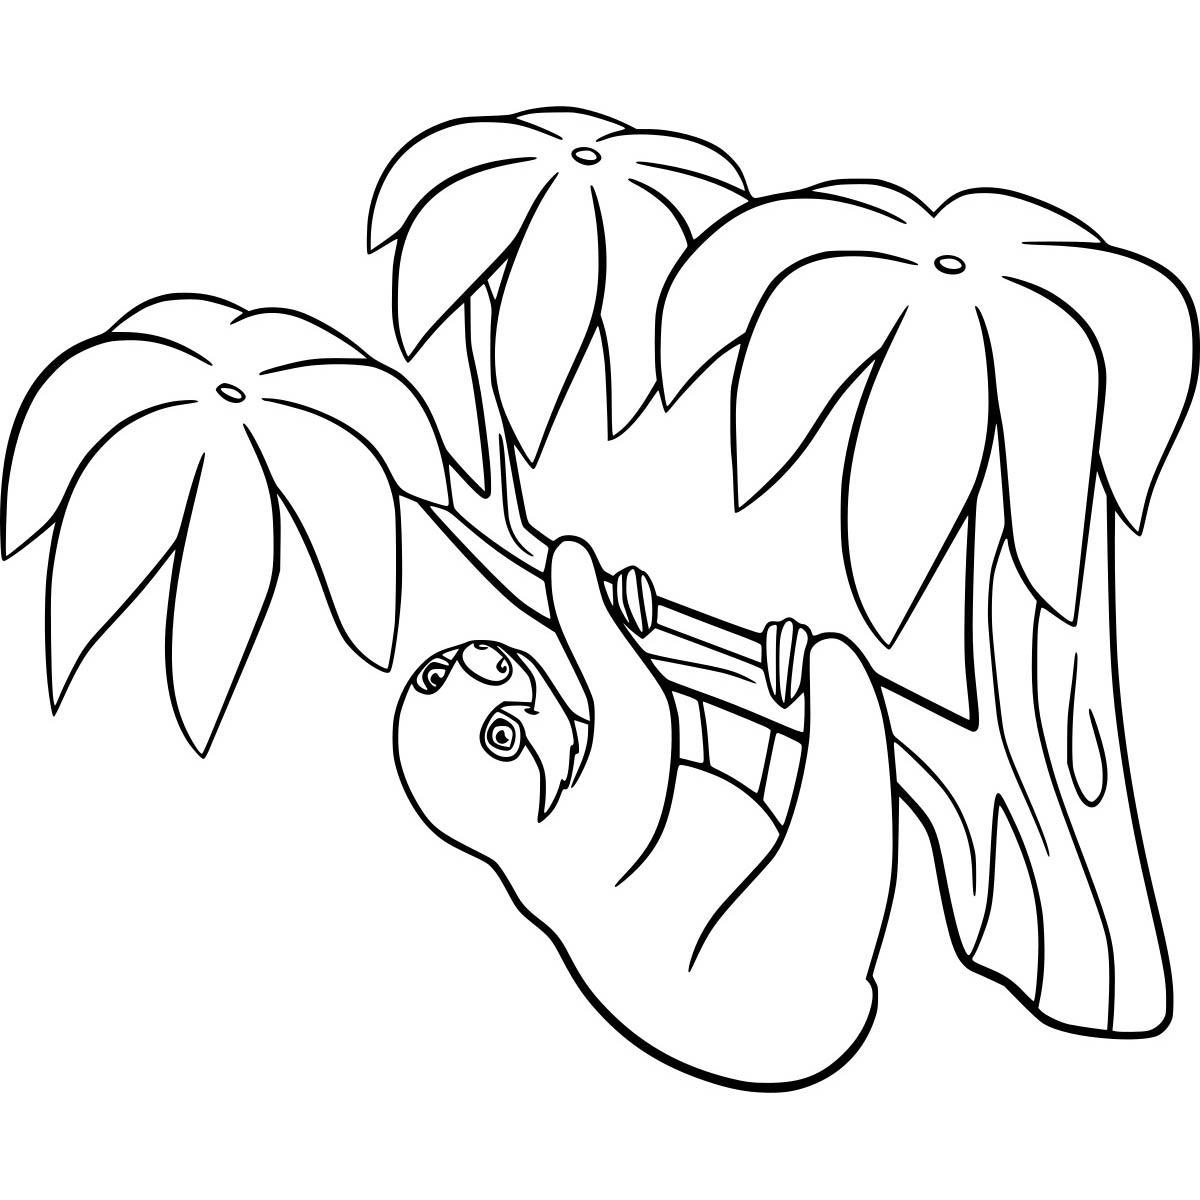 Free Three Toed Sloth Coloring Pages for Kids printable